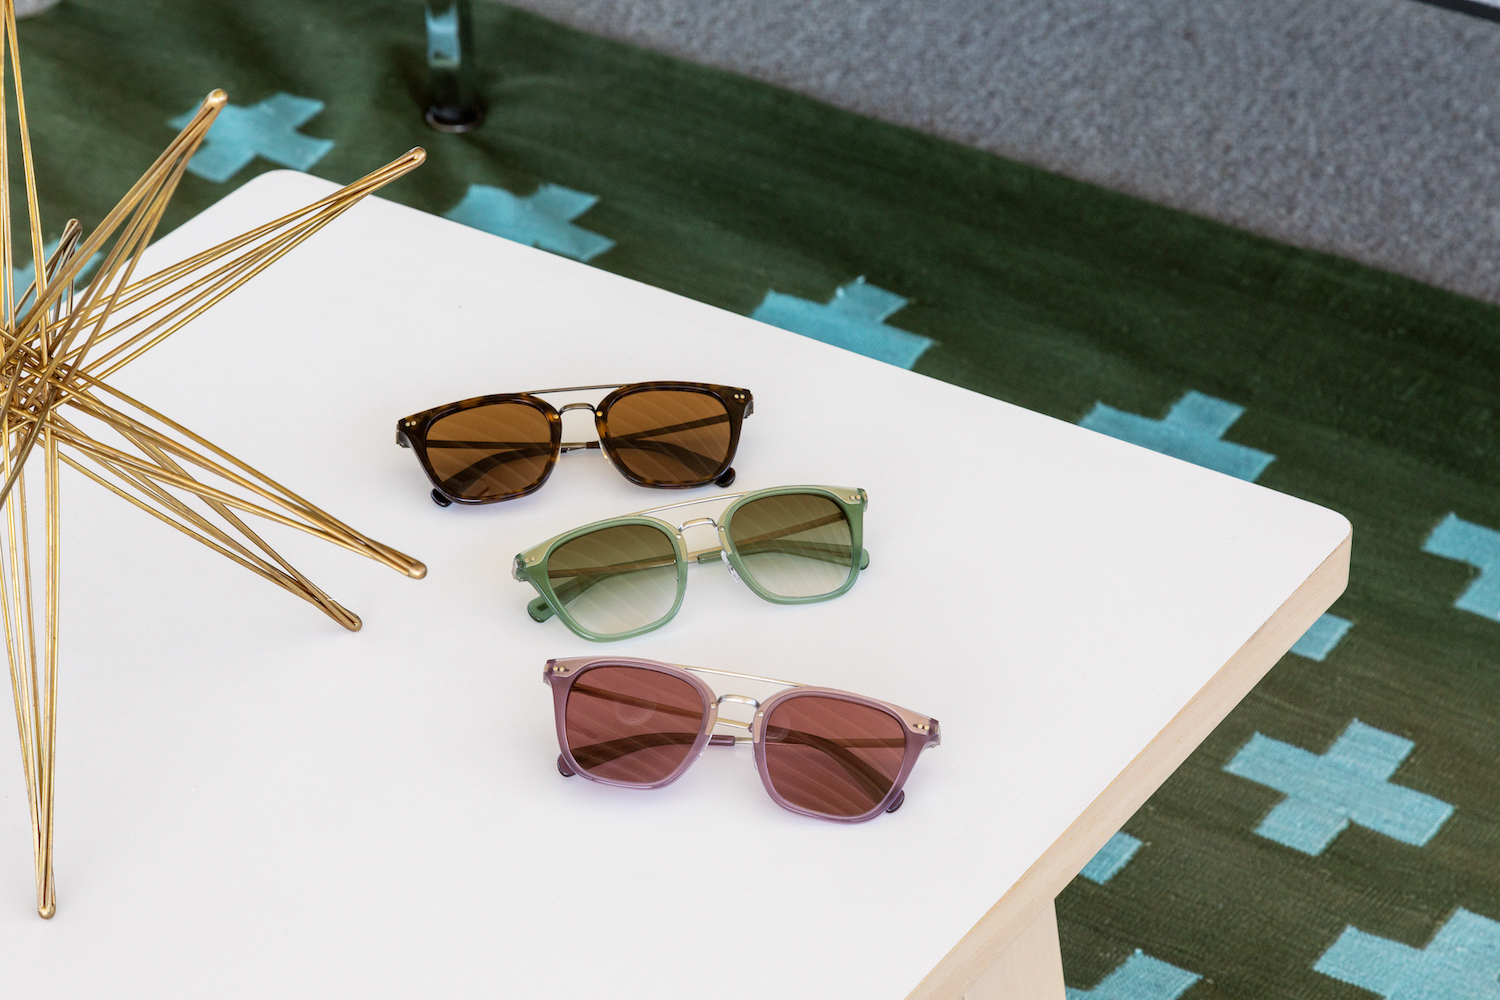 Frère x Oliver Peoples merge to create the perfect upgrade to your optical wardrobe, and the resulting collaboration is electric